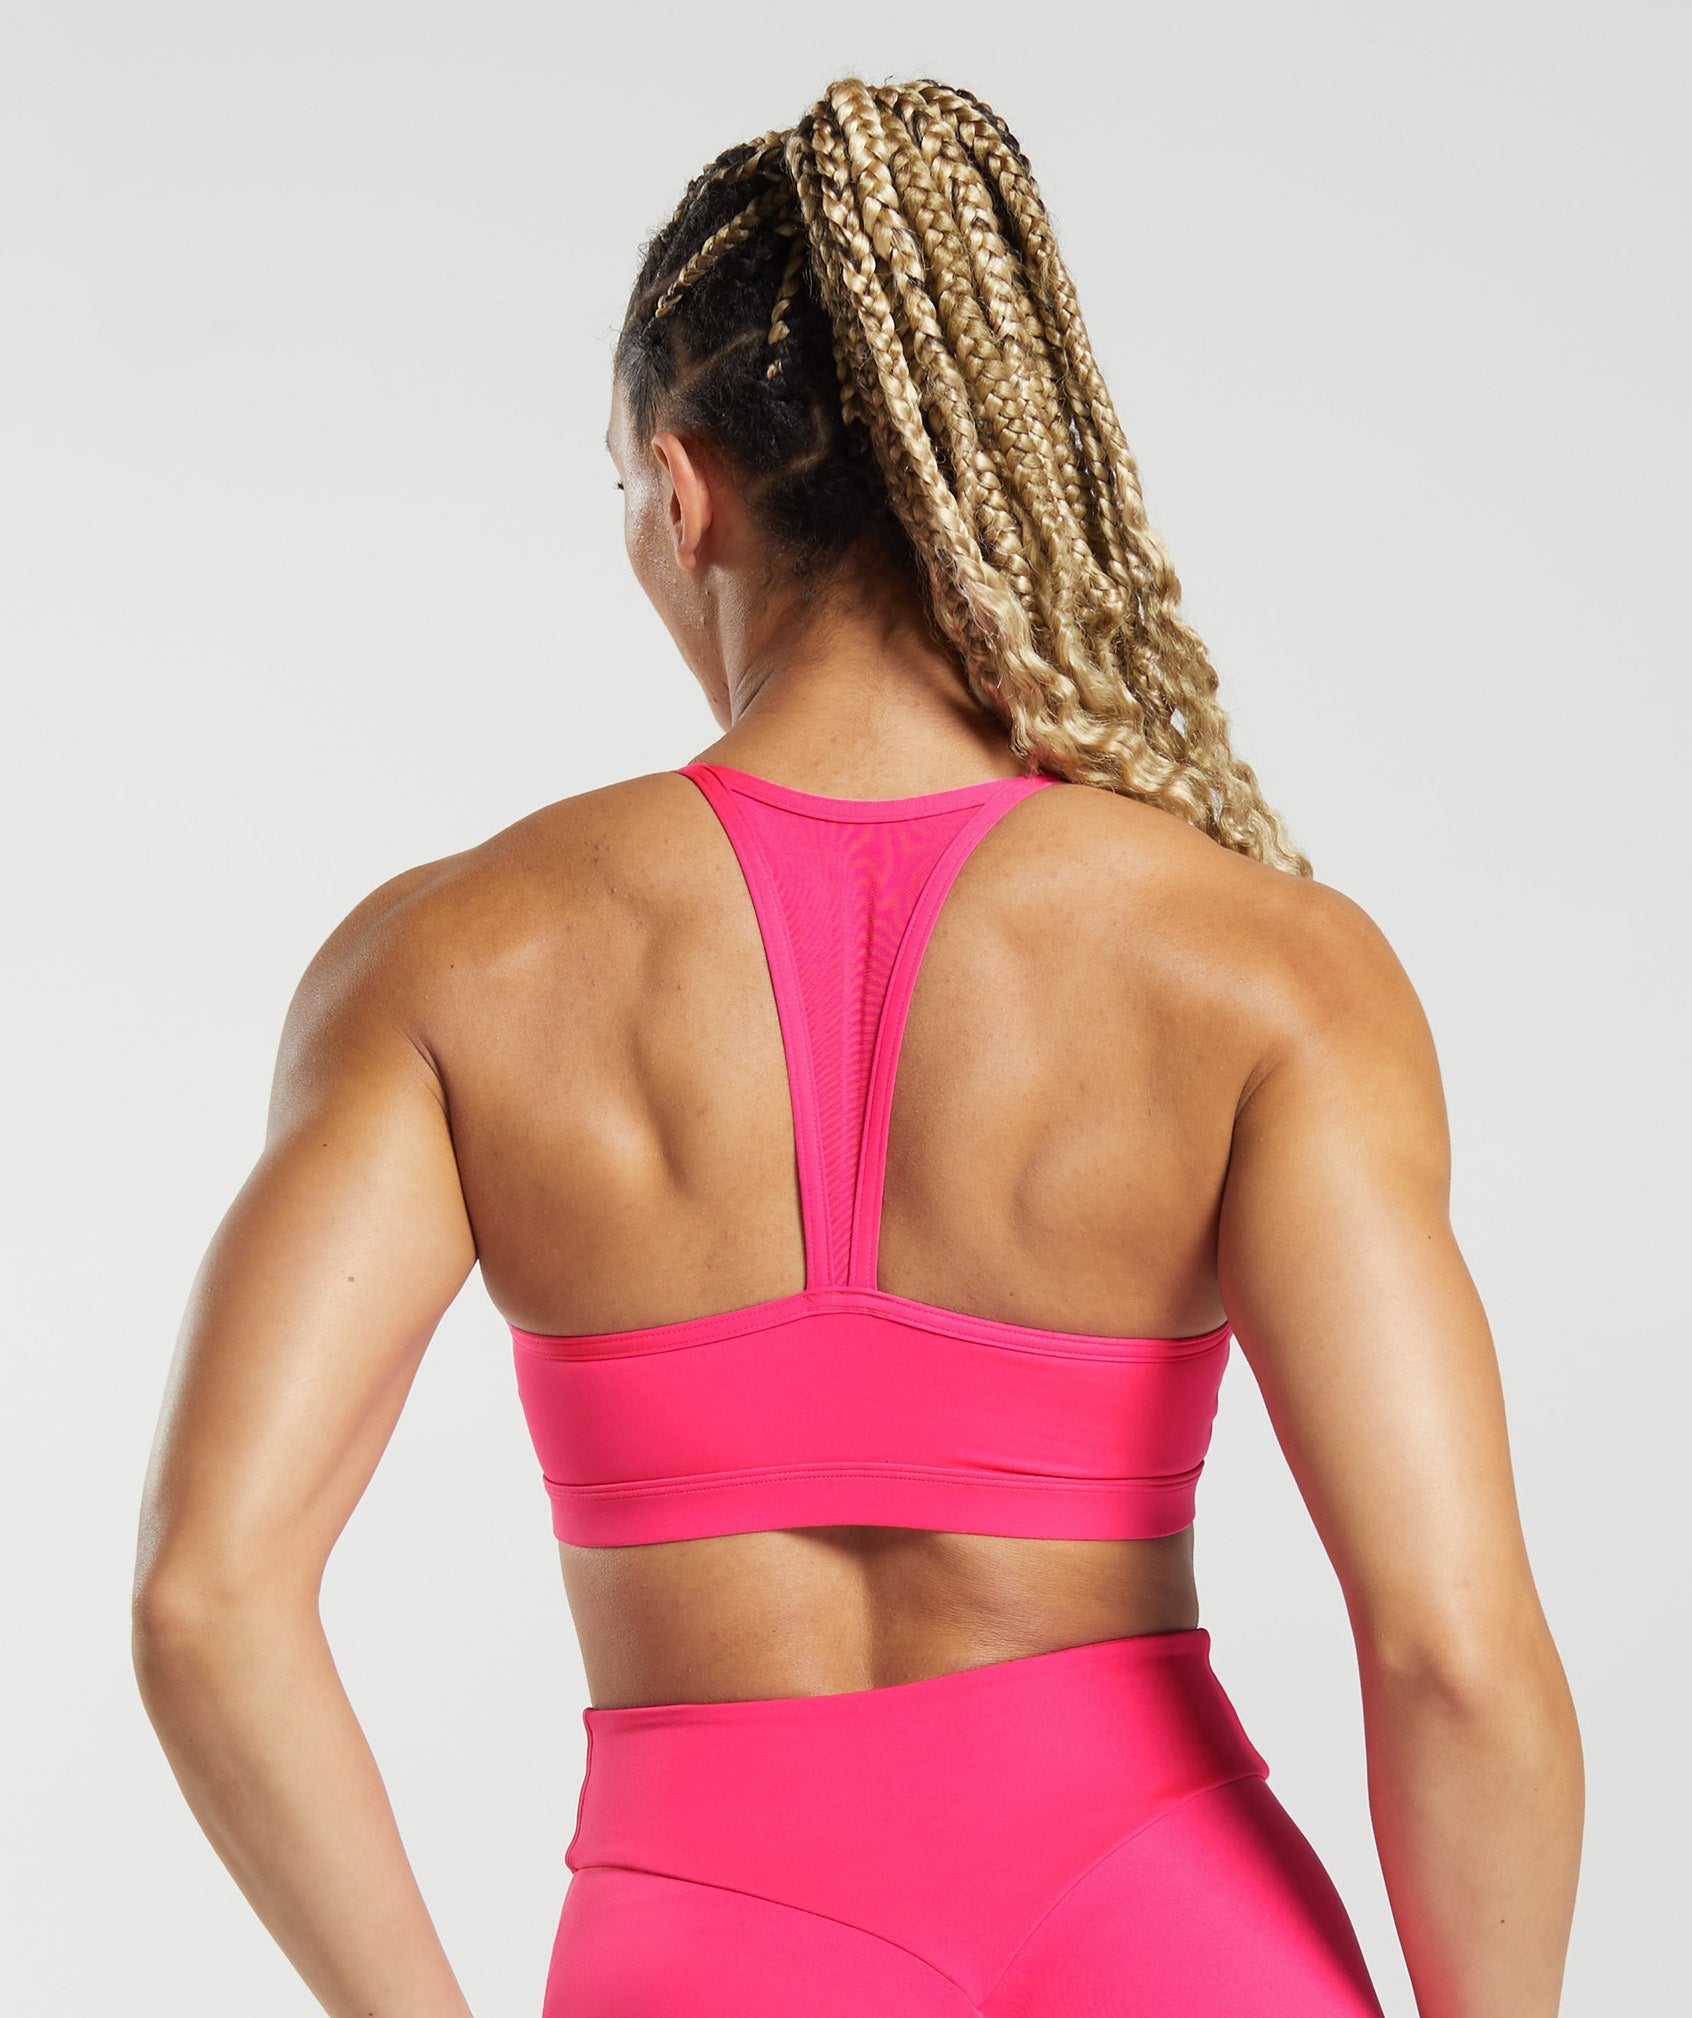 Bright Neon Hot Pink Spandex Athletic Sports Bra Tops